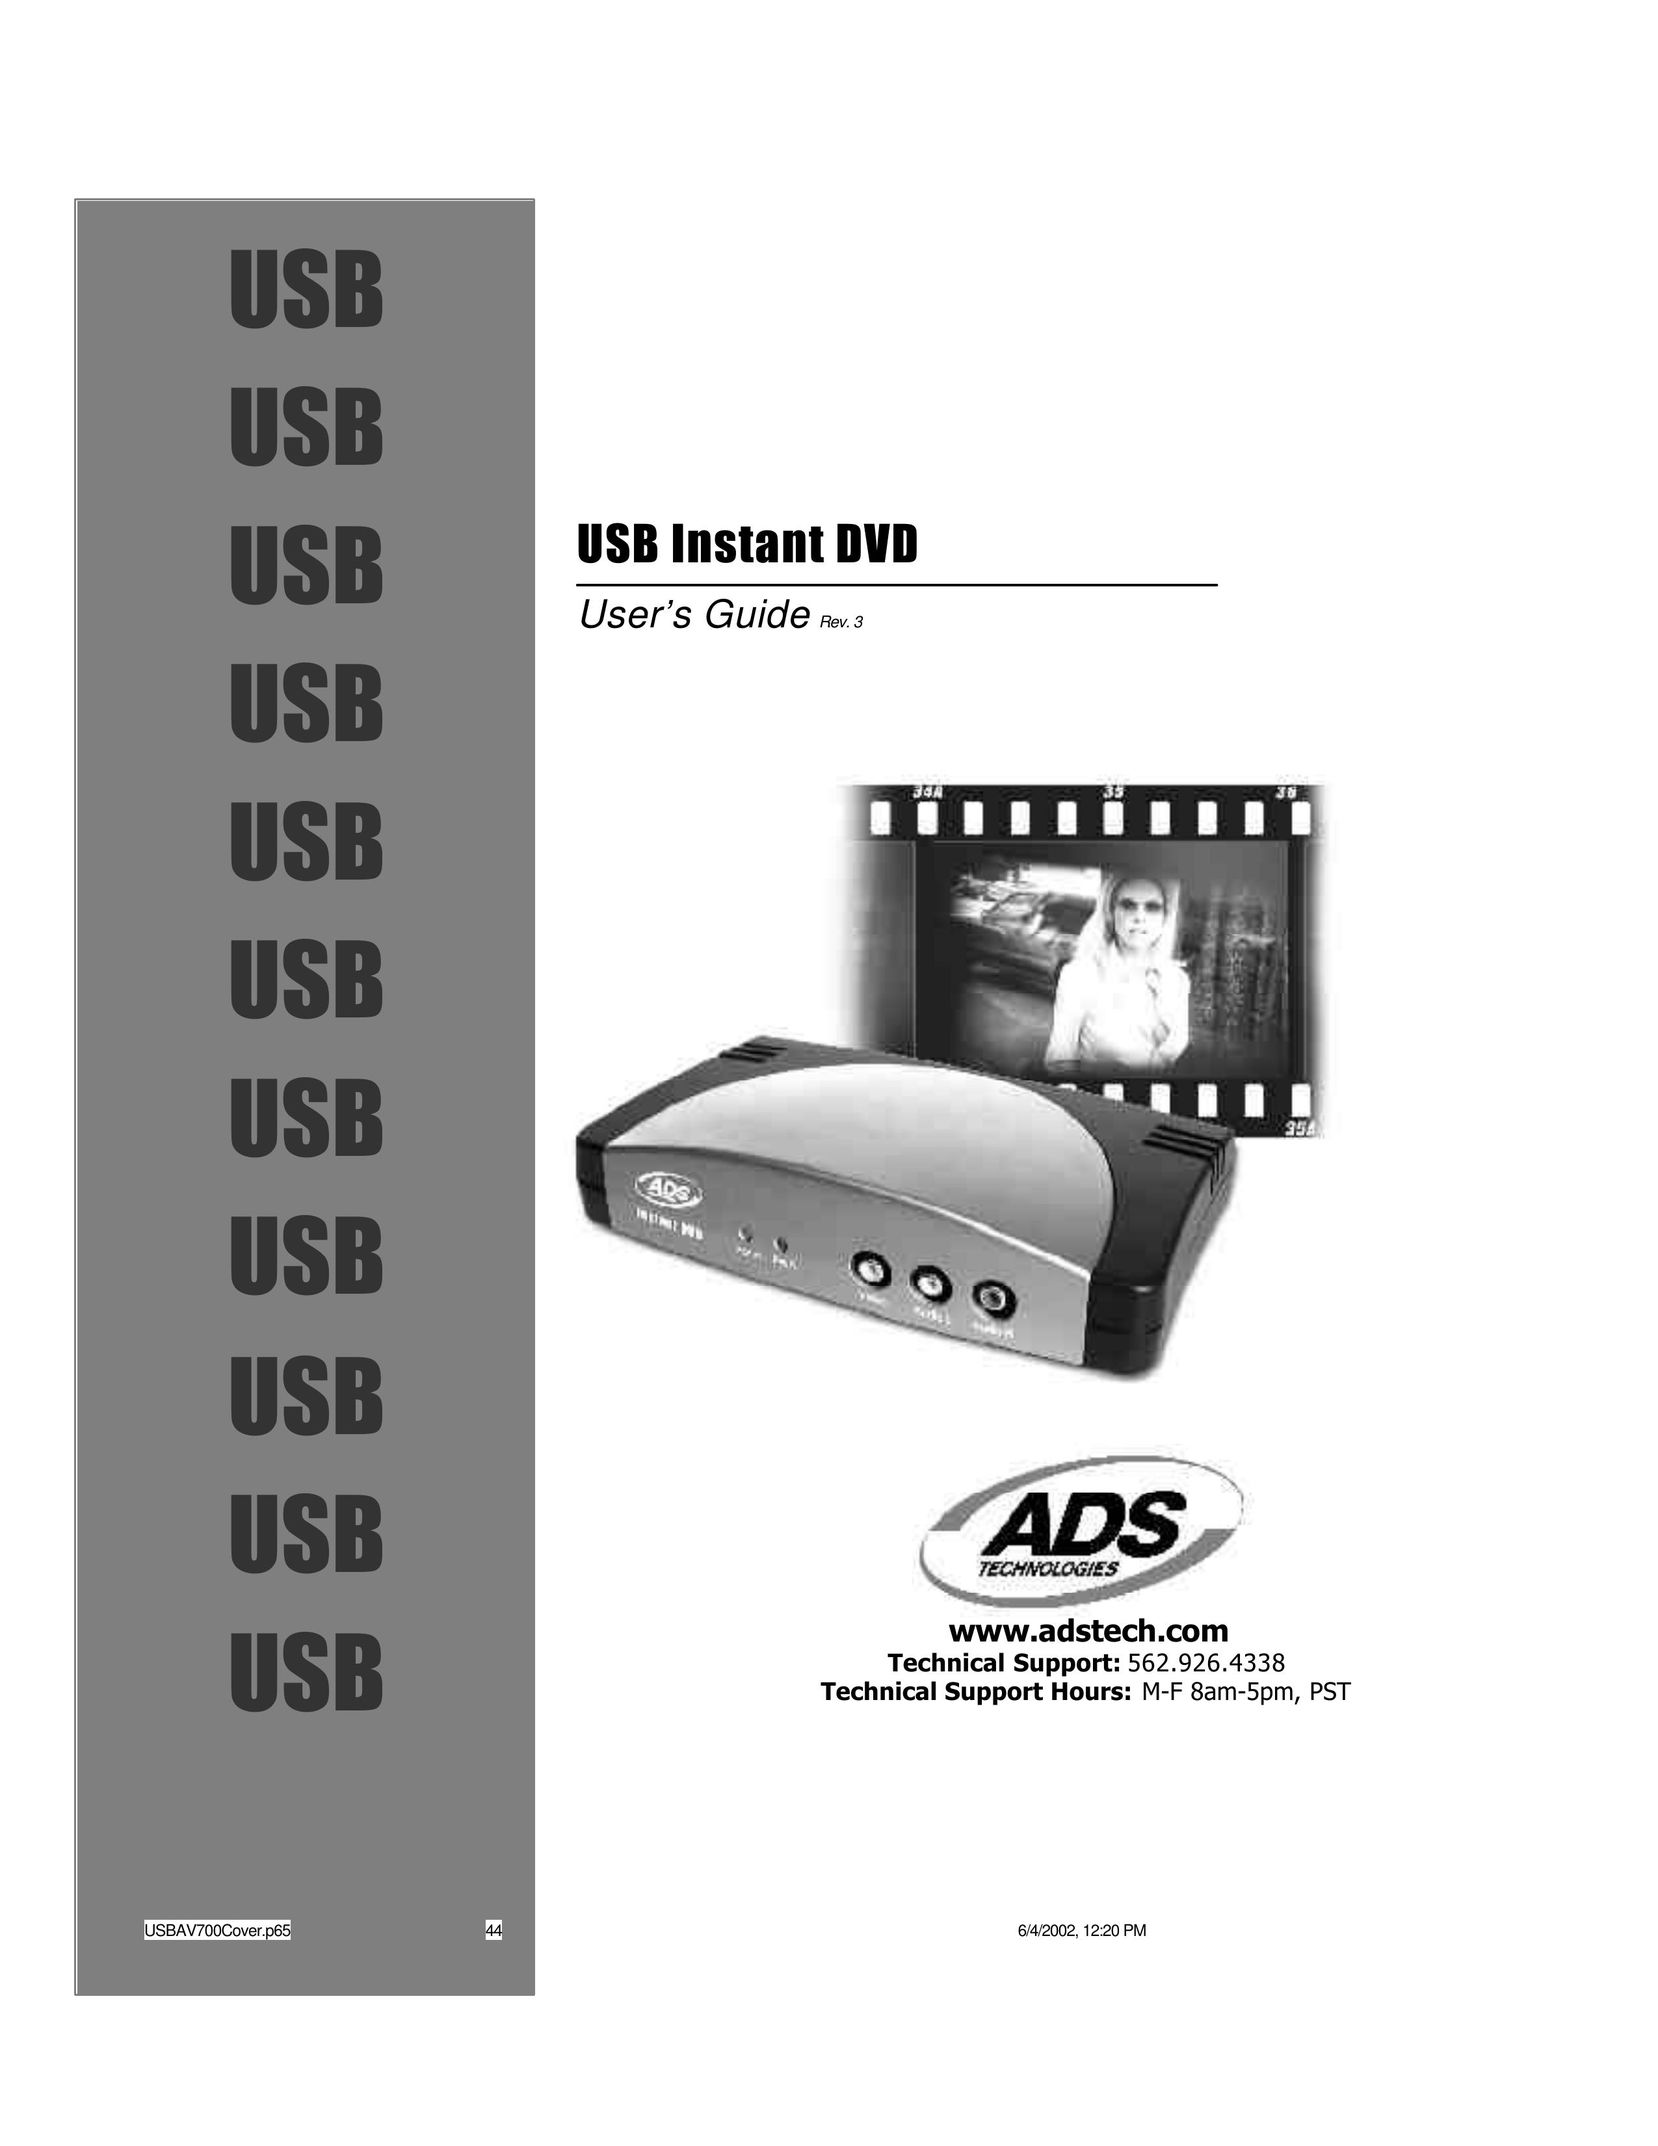 ADS Technologies USB Instant DVD DVD Recorder User Manual (Page 1)